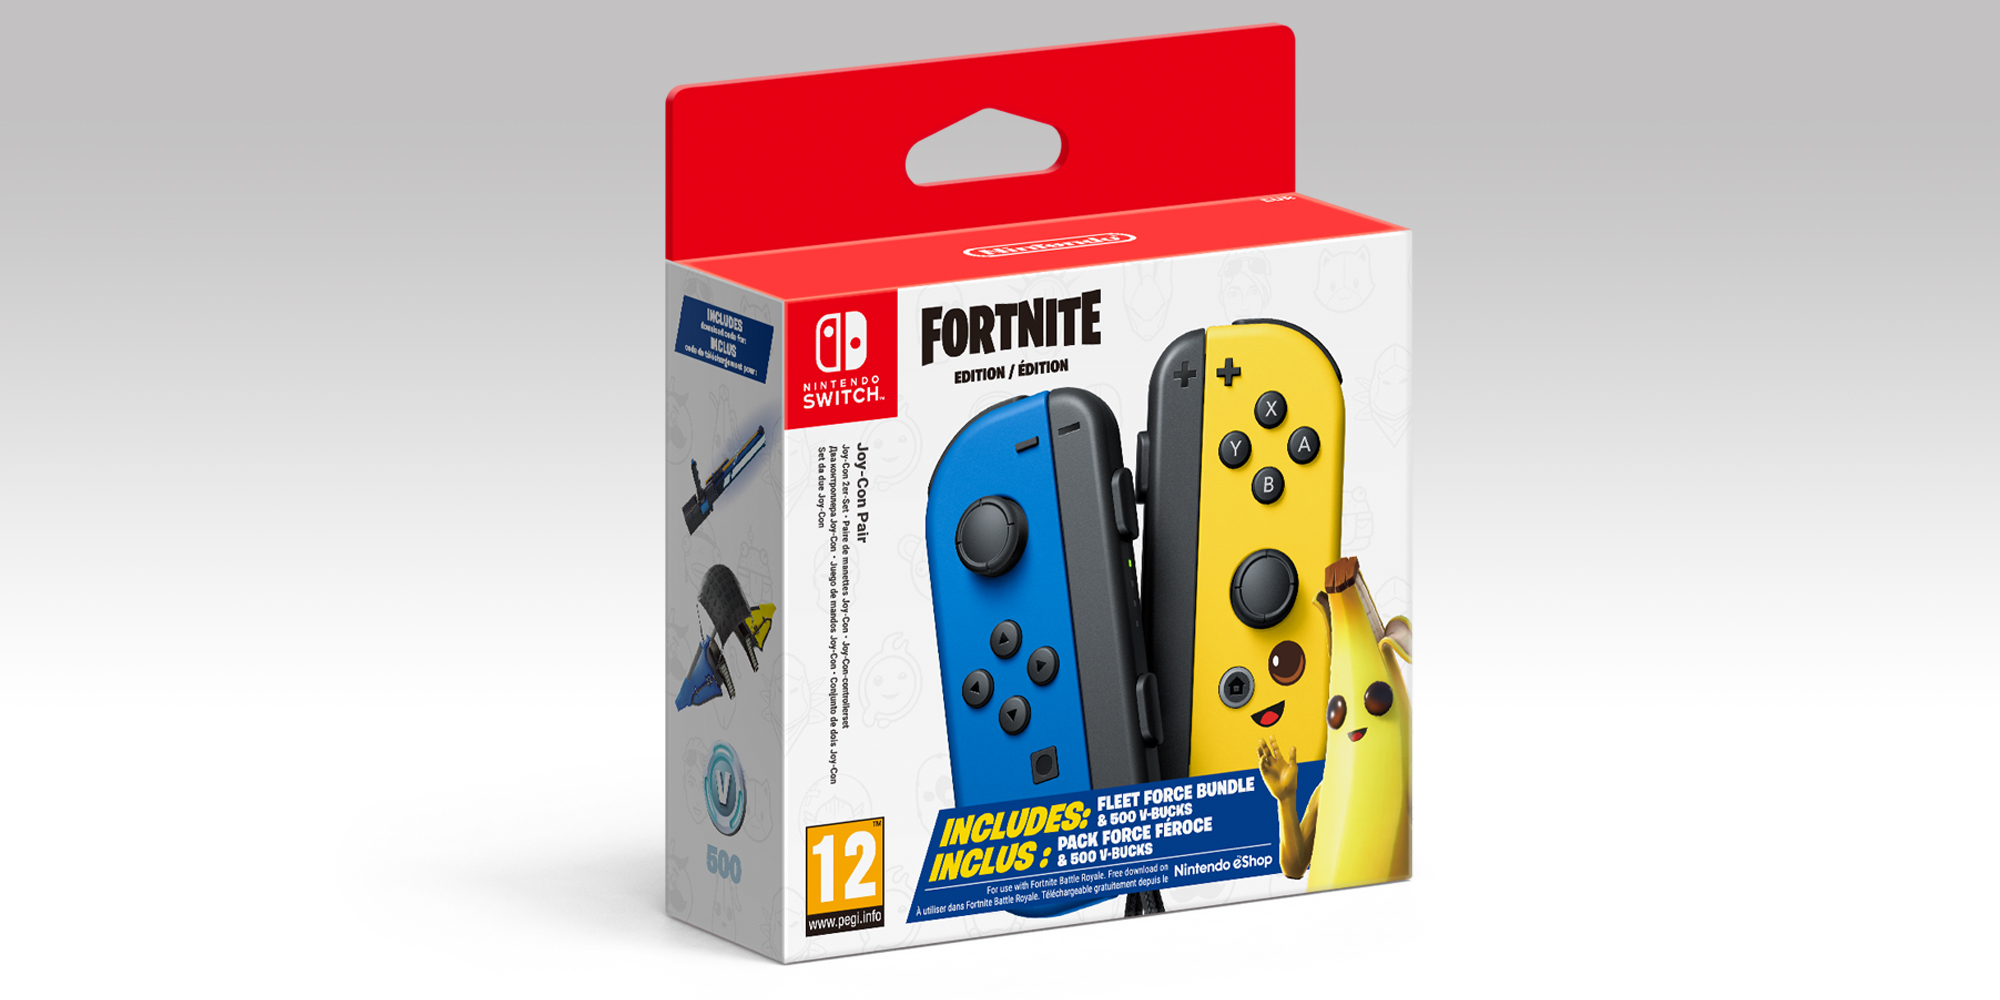 Nintendo Uk En Twitter Gear Up In Style With The Nintendo Switch Joy Con Pair Fortnite Edition Available 04 06 It Includes A Uniquely Designed Yellow Joy Con And Blue Joy Con 500 V Bucks Amp A